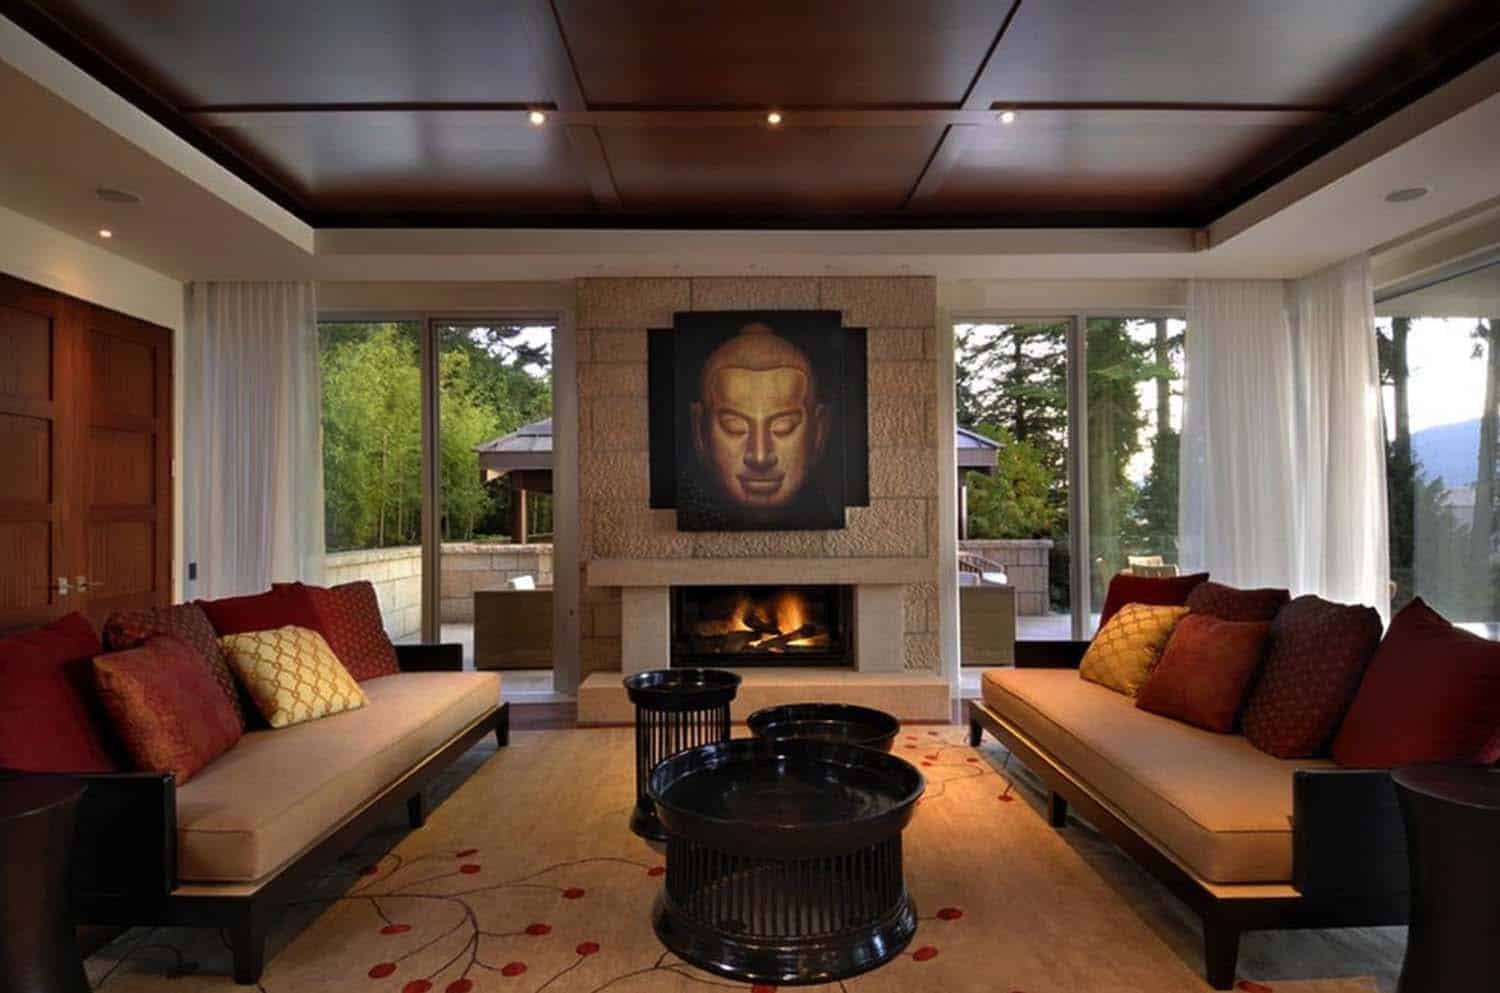 vancouver-island-residence-mckinley-burkart-architects-09-1-kindesign